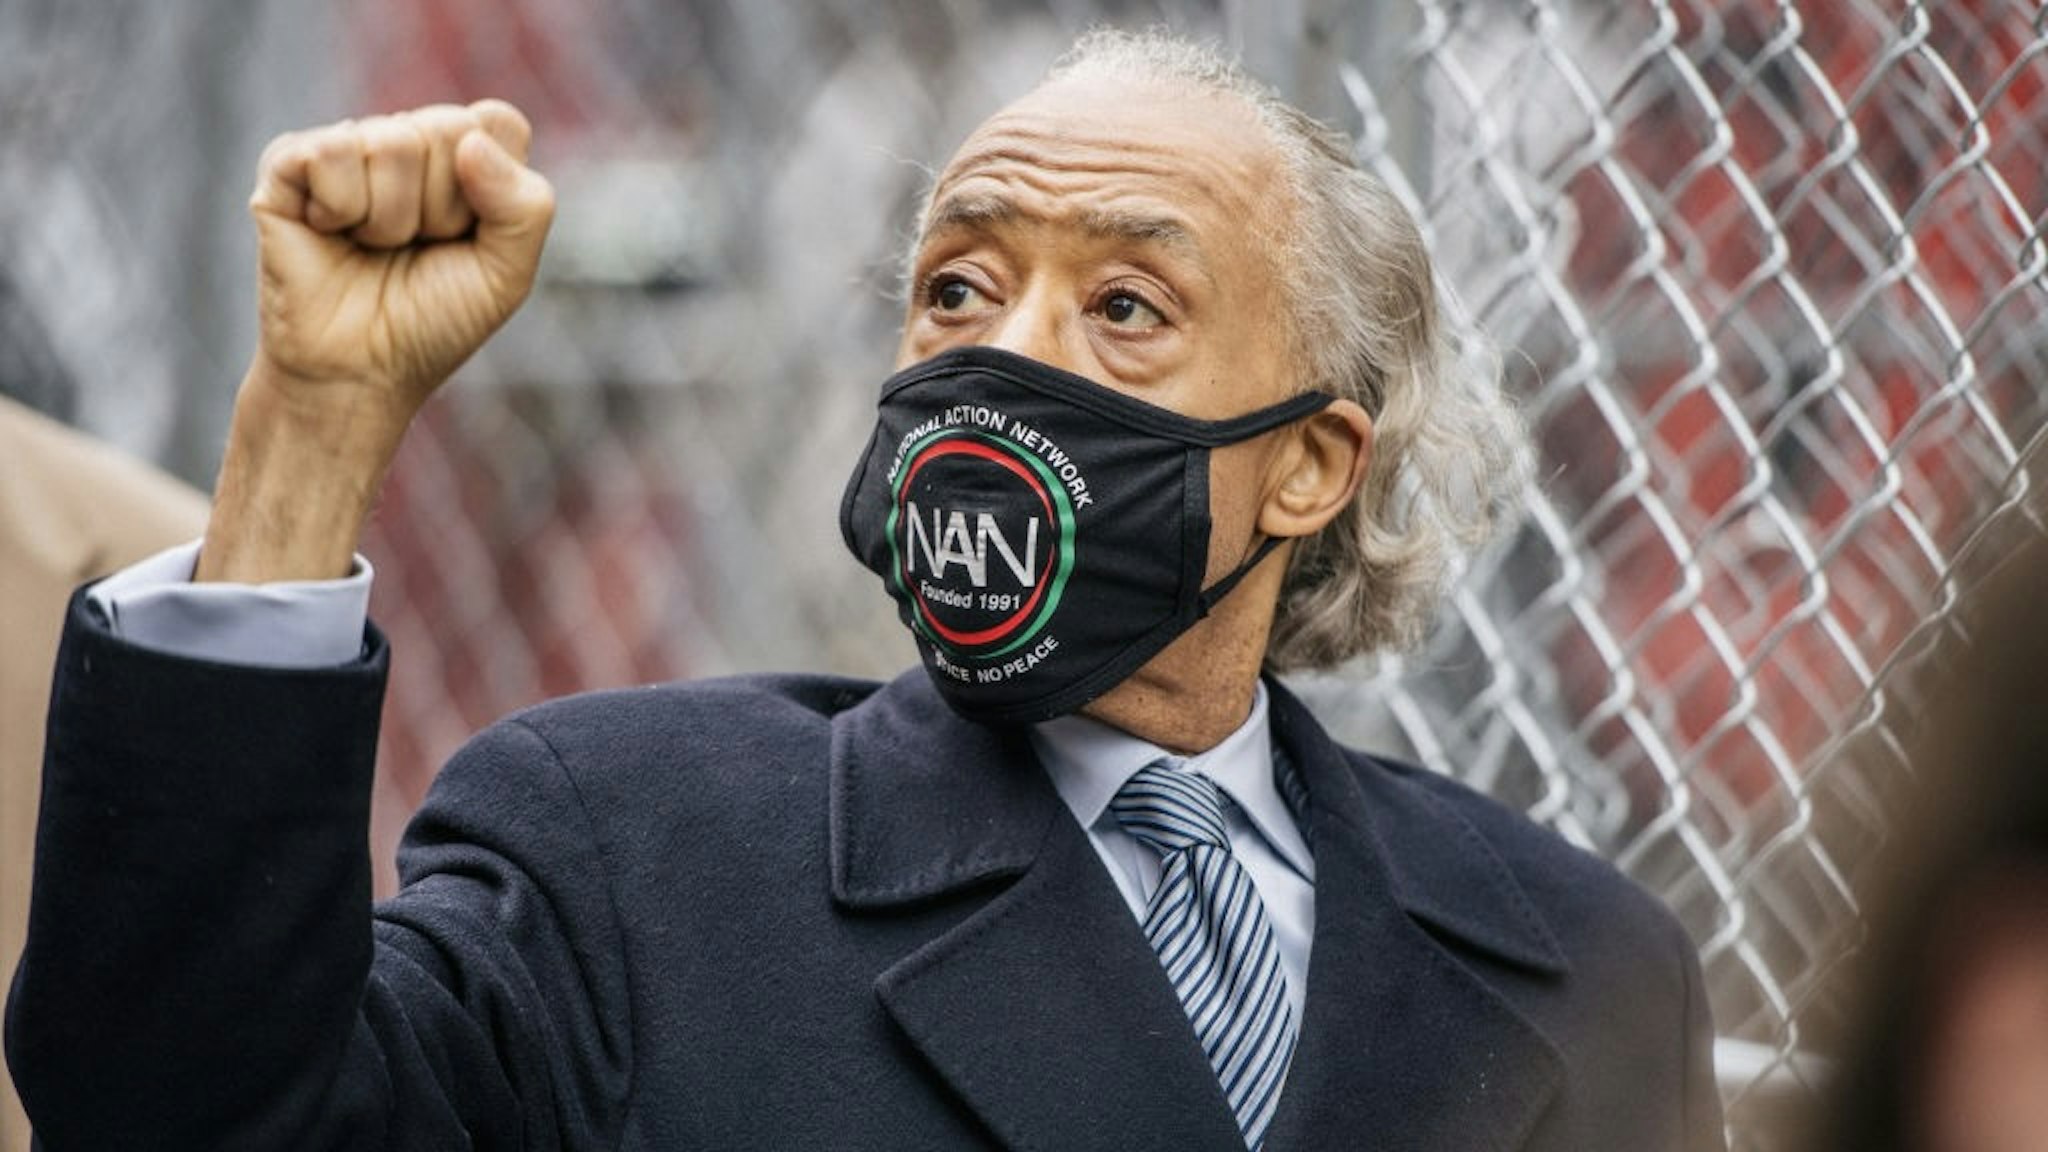 MINNEAPOLIS, MN - APRIL 19: Rev. Al Sharpton arrives at the Hennepin County Government Center on April 19, 2021 in Minneapolis, Minnesota. Closing statements are scheduled for today in the Derek Chauvin trial. Chauvin is charged with multiple counts of murder in the death of George Floyd. (Photo by Brandon Bell/Getty Images)